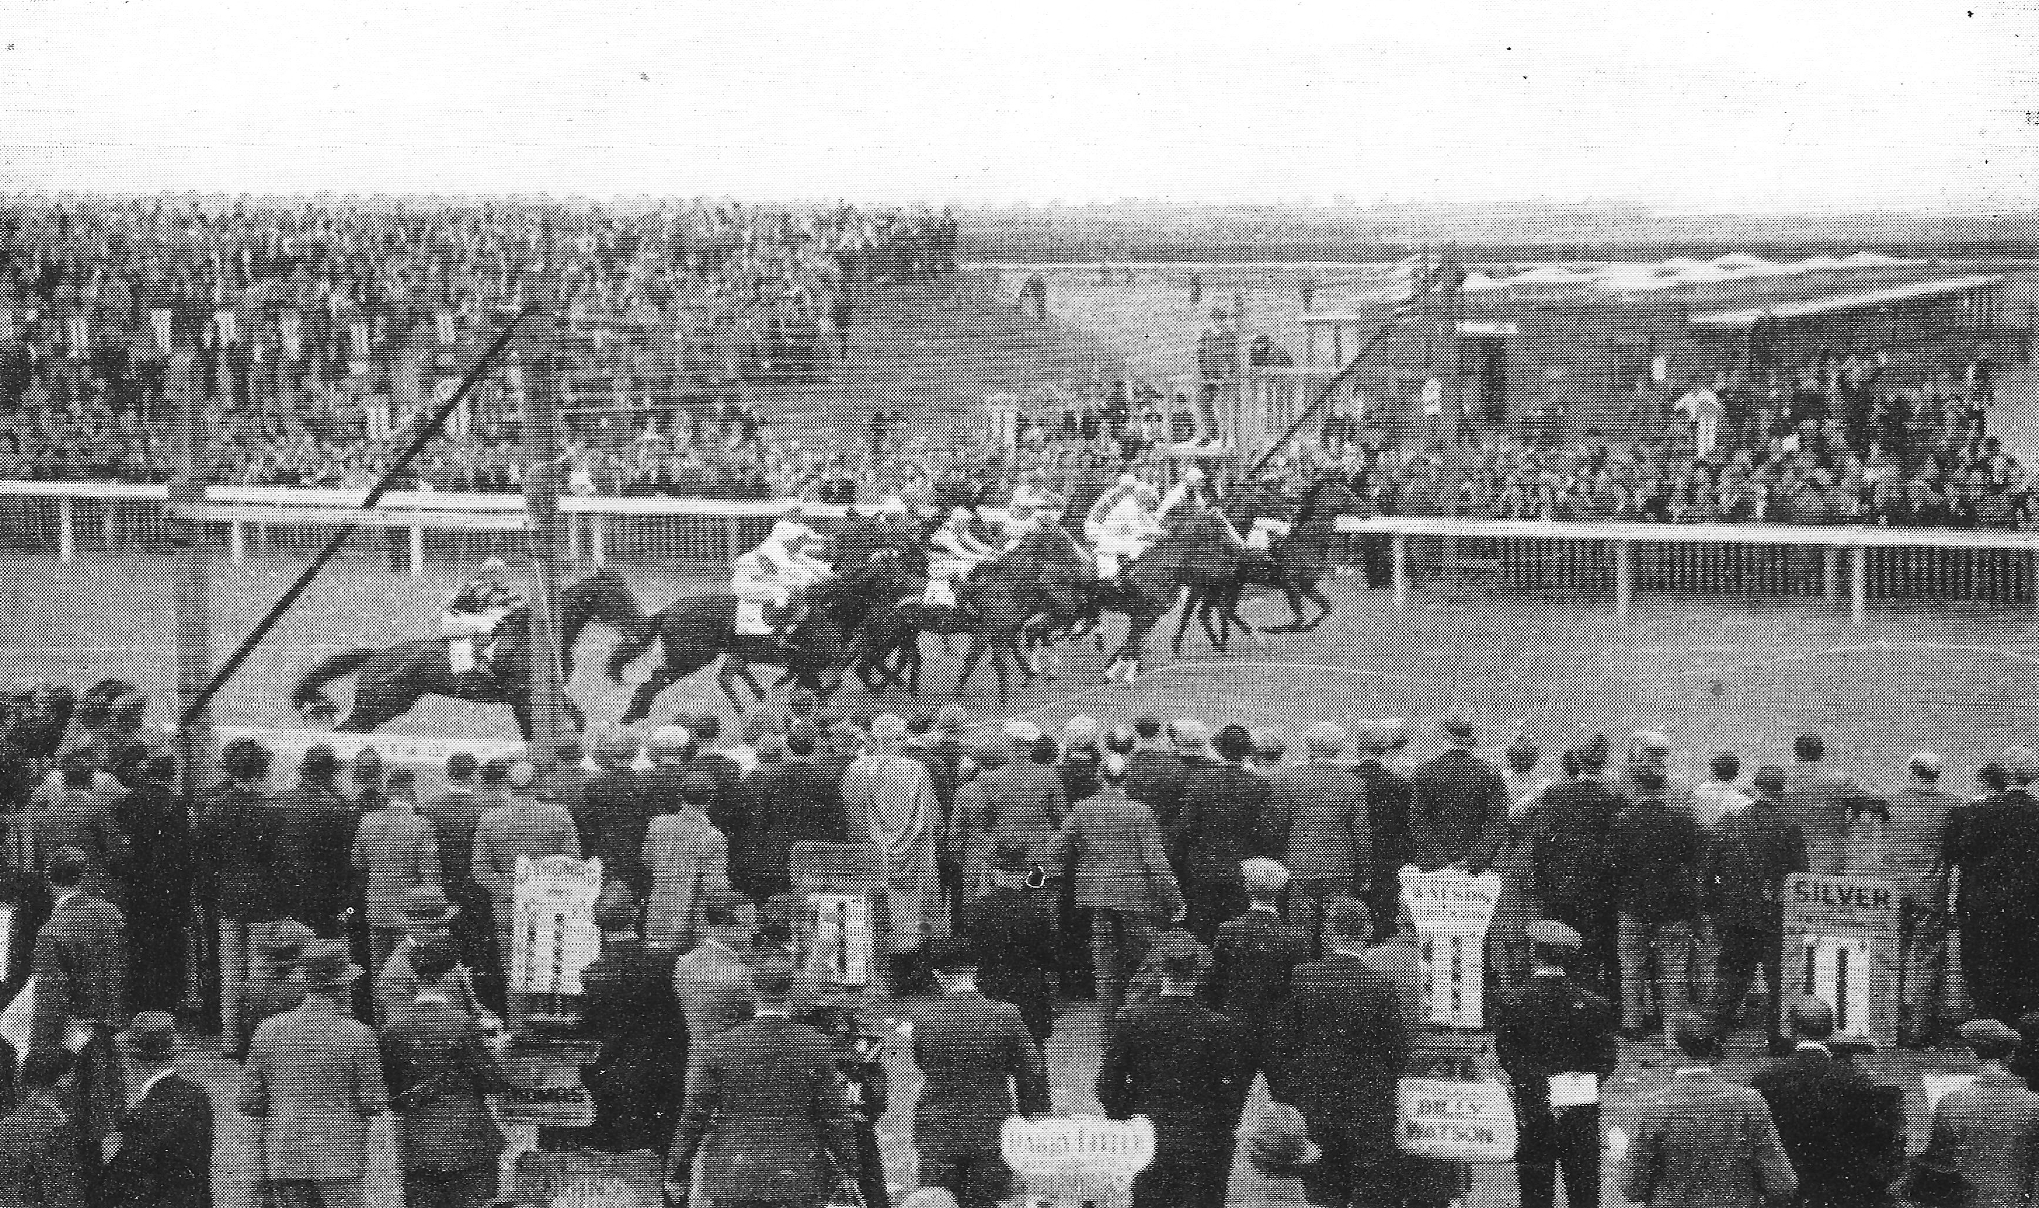 The finishing line in the late 1940s